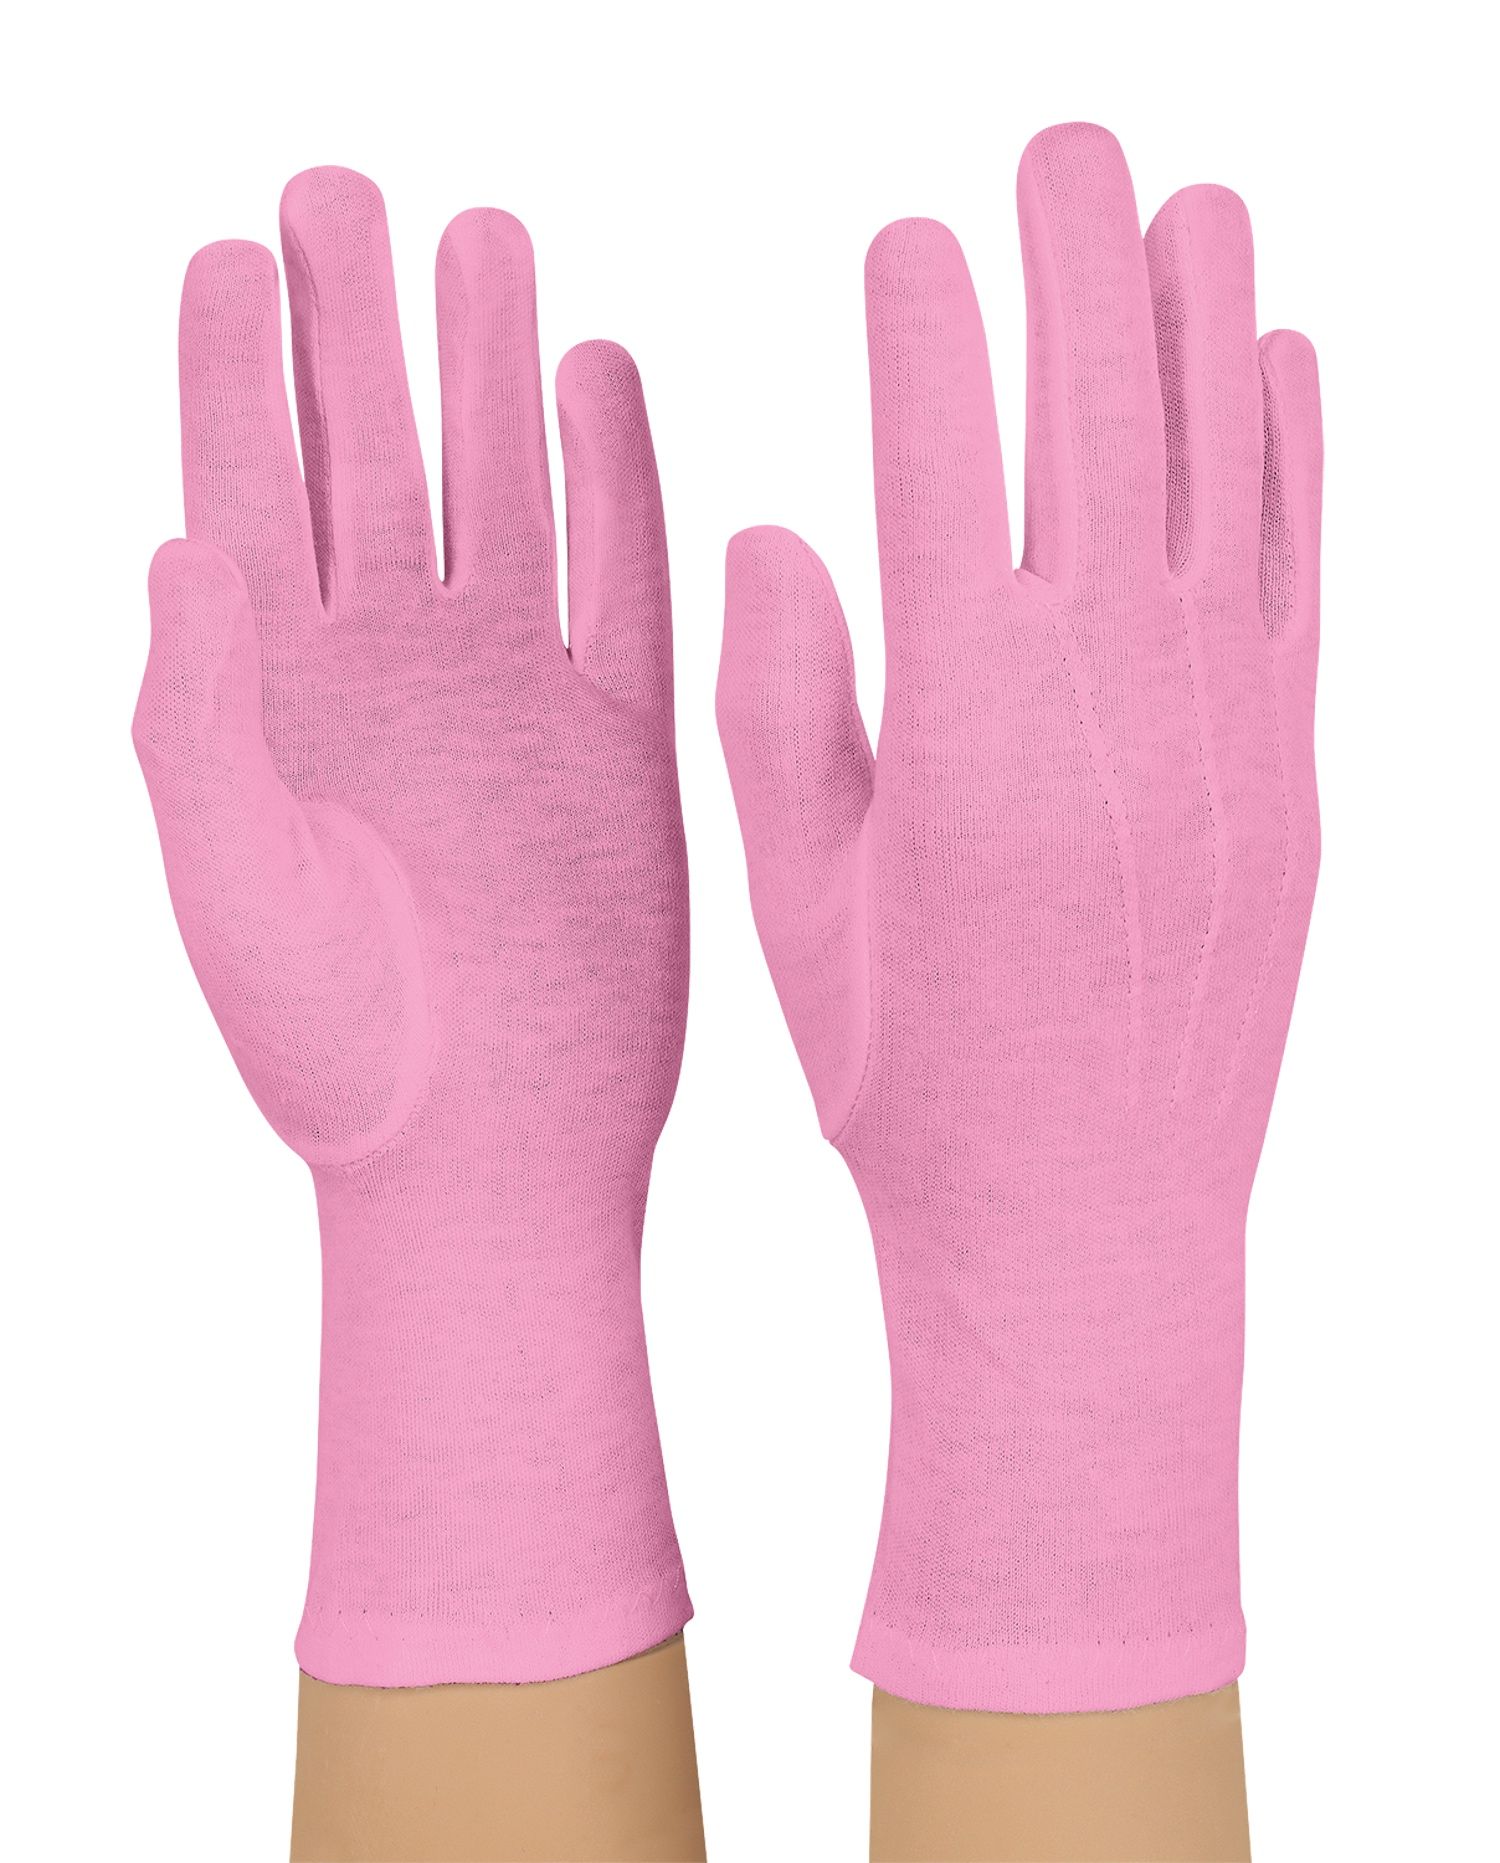 StylePlus Breast Cancer Awareness Cotton Gloves 